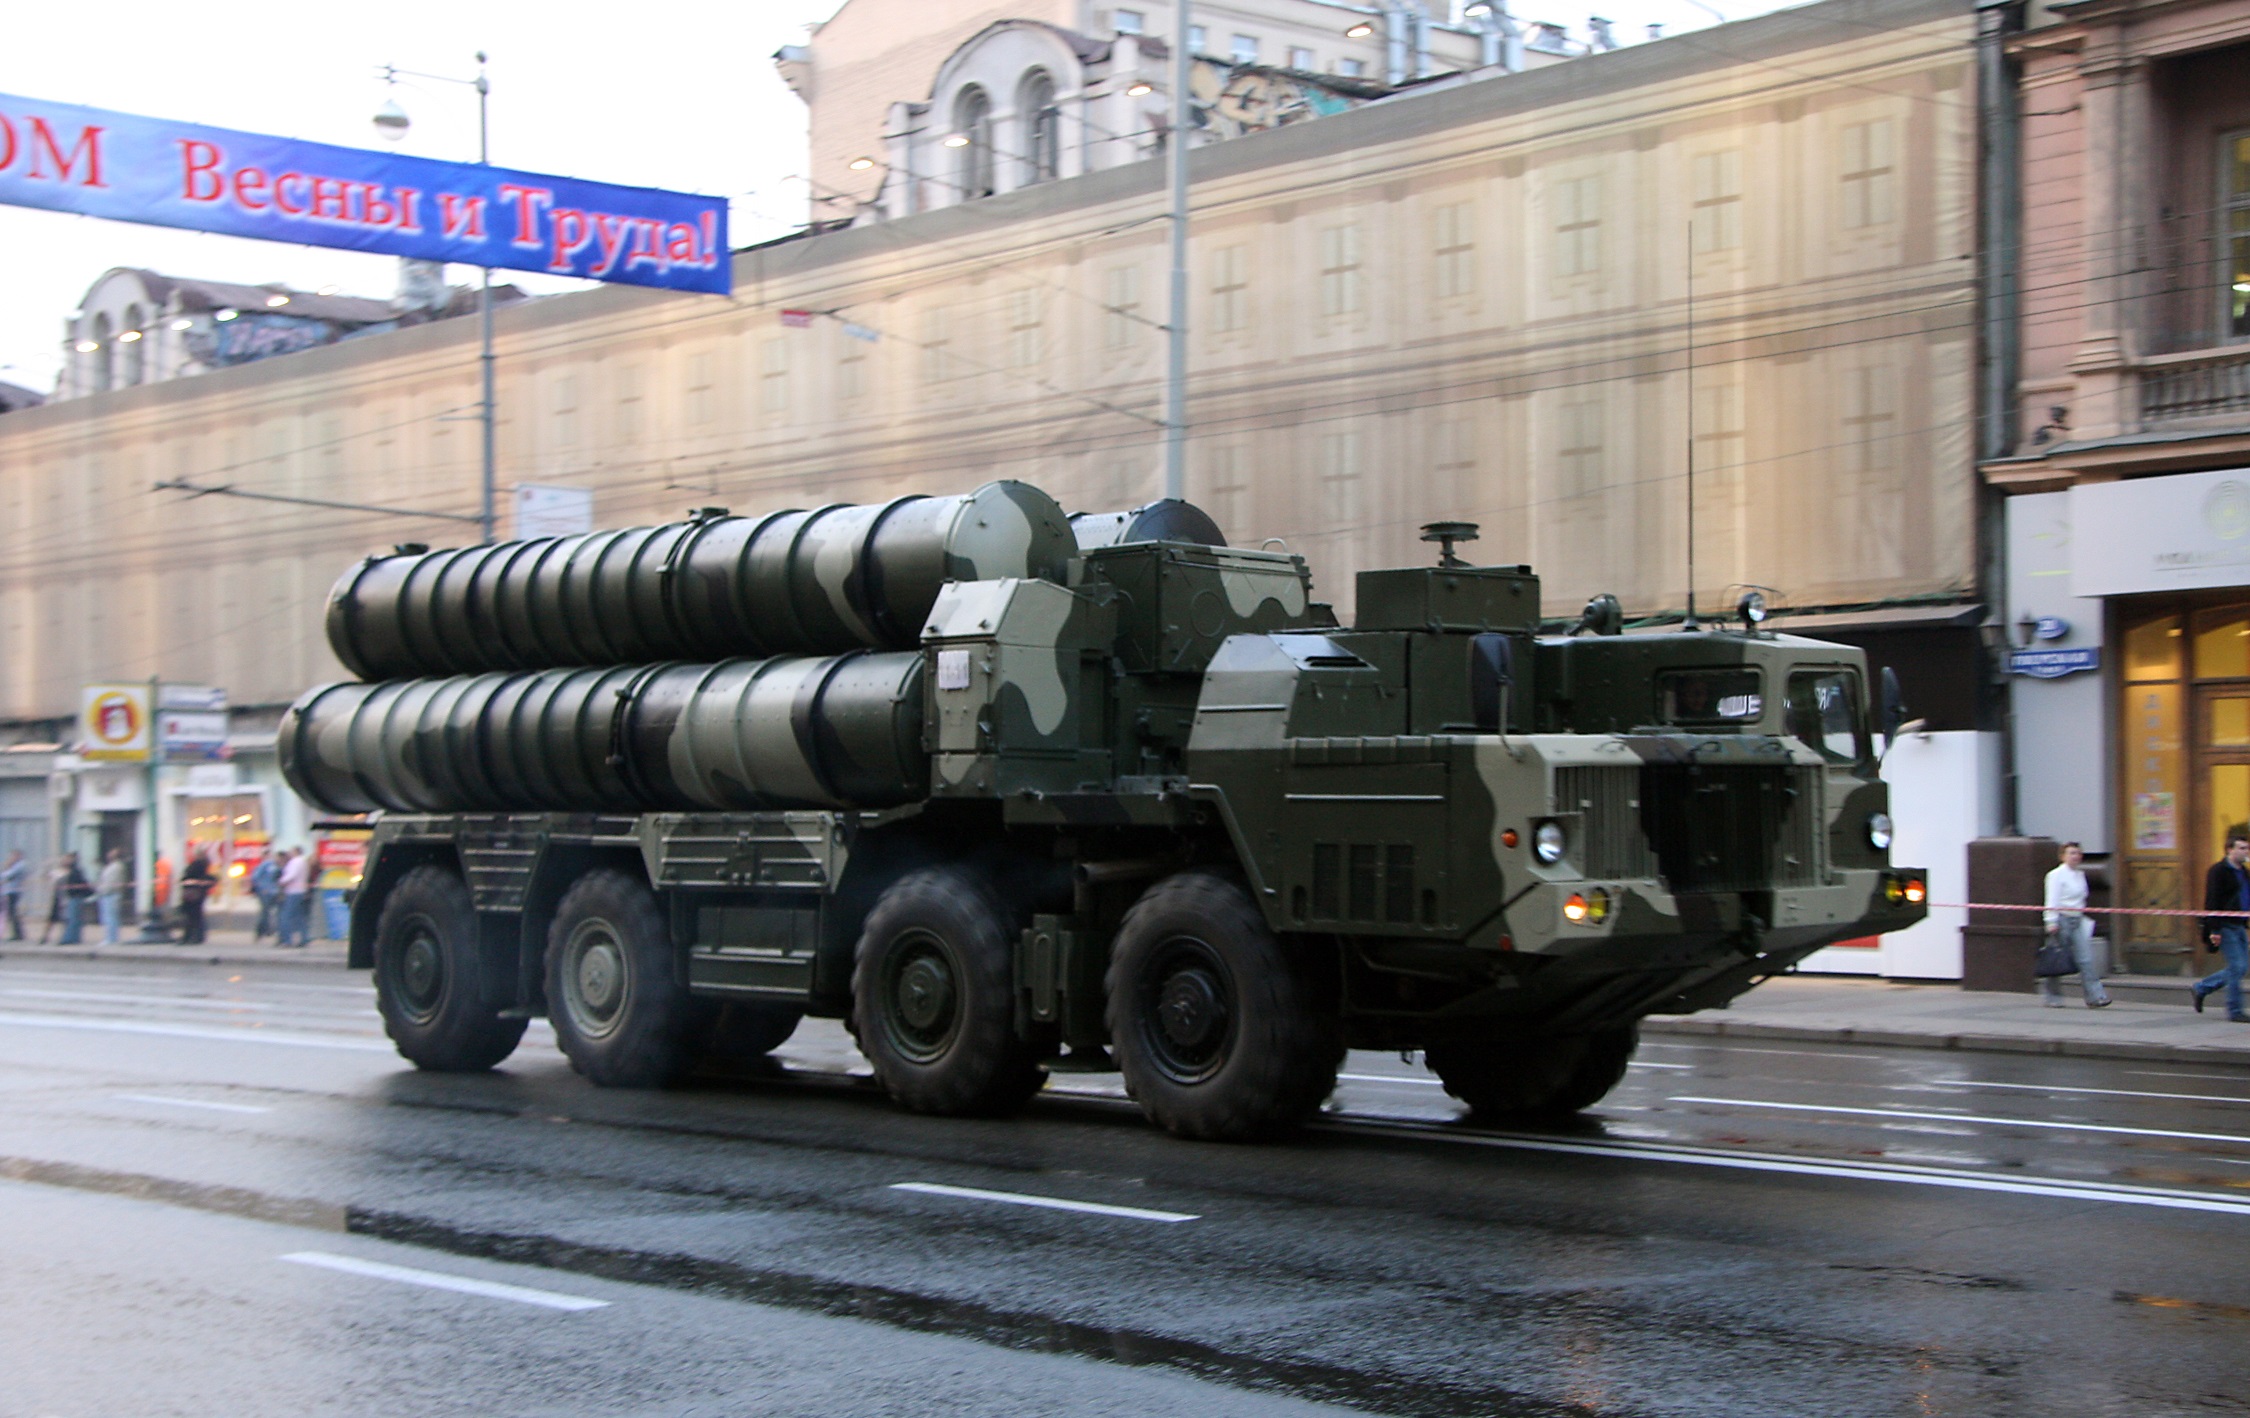 S-300_-_2009_Moscow_Victory_Day_Parade_%282%29.jpg